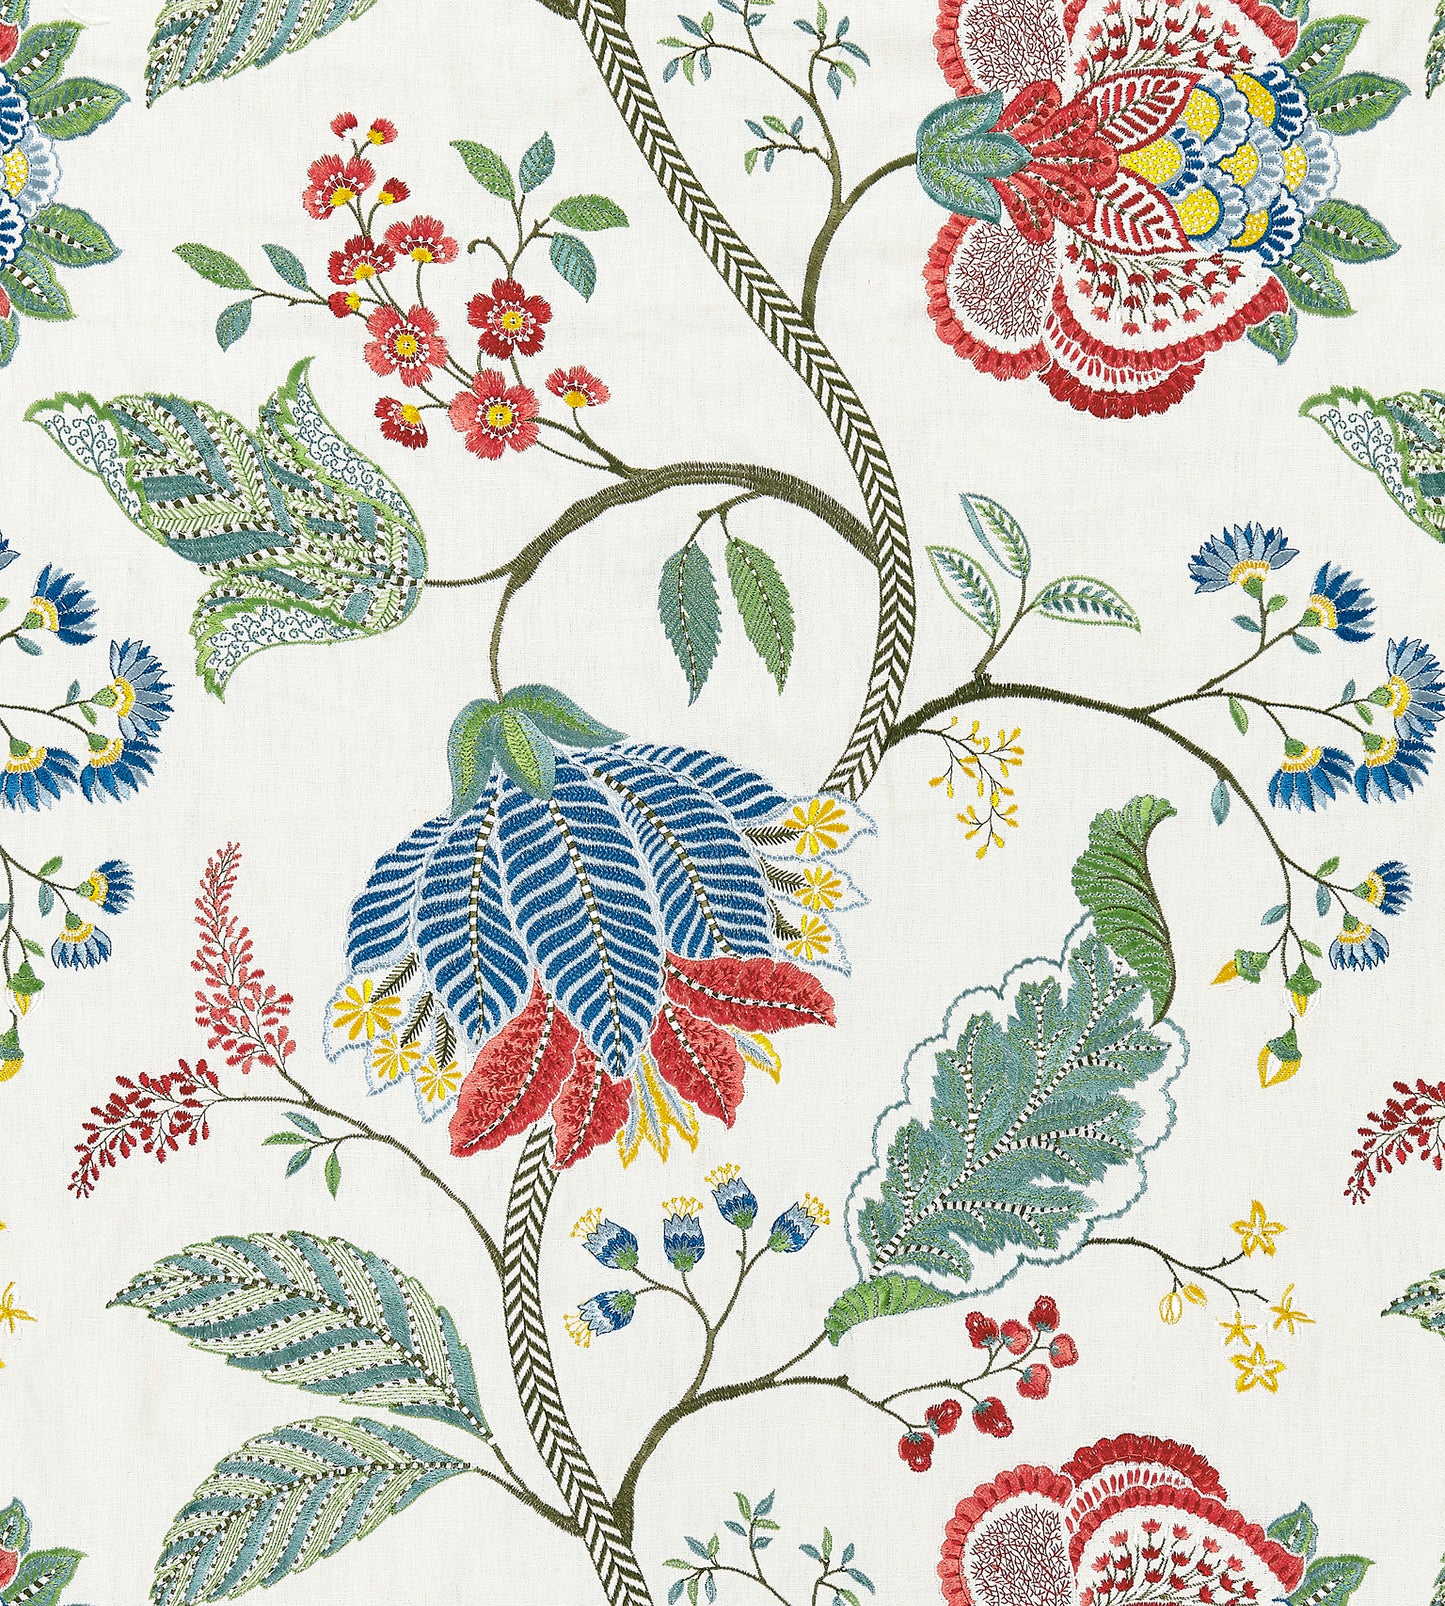 Purchase Scalamandre Fabric Pattern SC 000327175, Palampore Embroidery Bloom 1